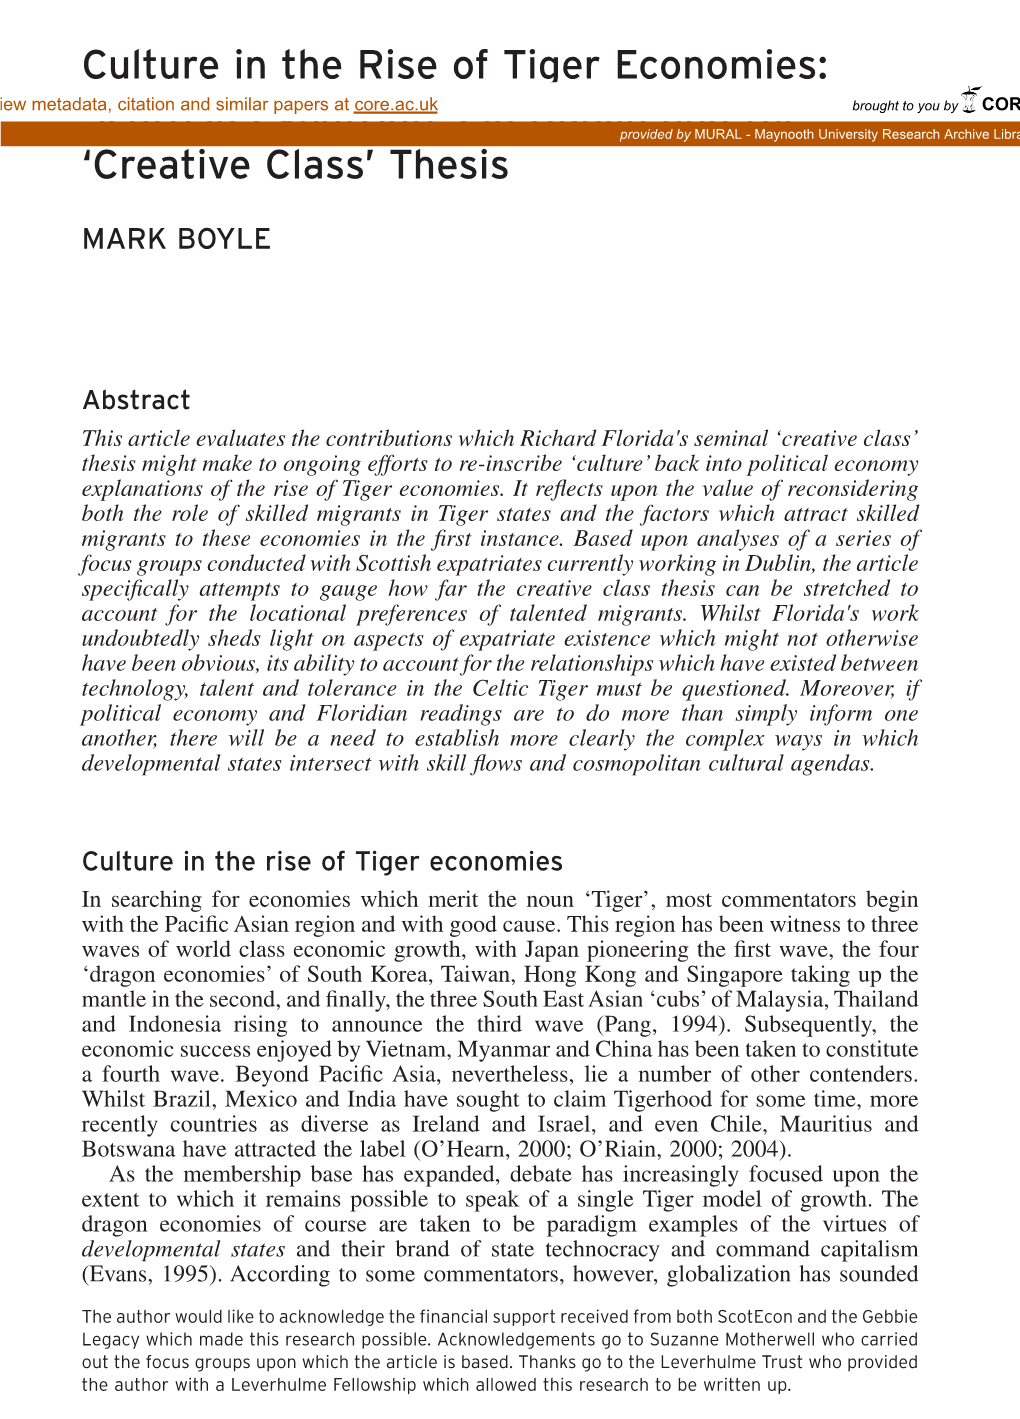 Culture in the Rise of Tiger Economies: View Metadata, Citation and Similar Papers at Core.Ac.Uk Brought to You by CORE